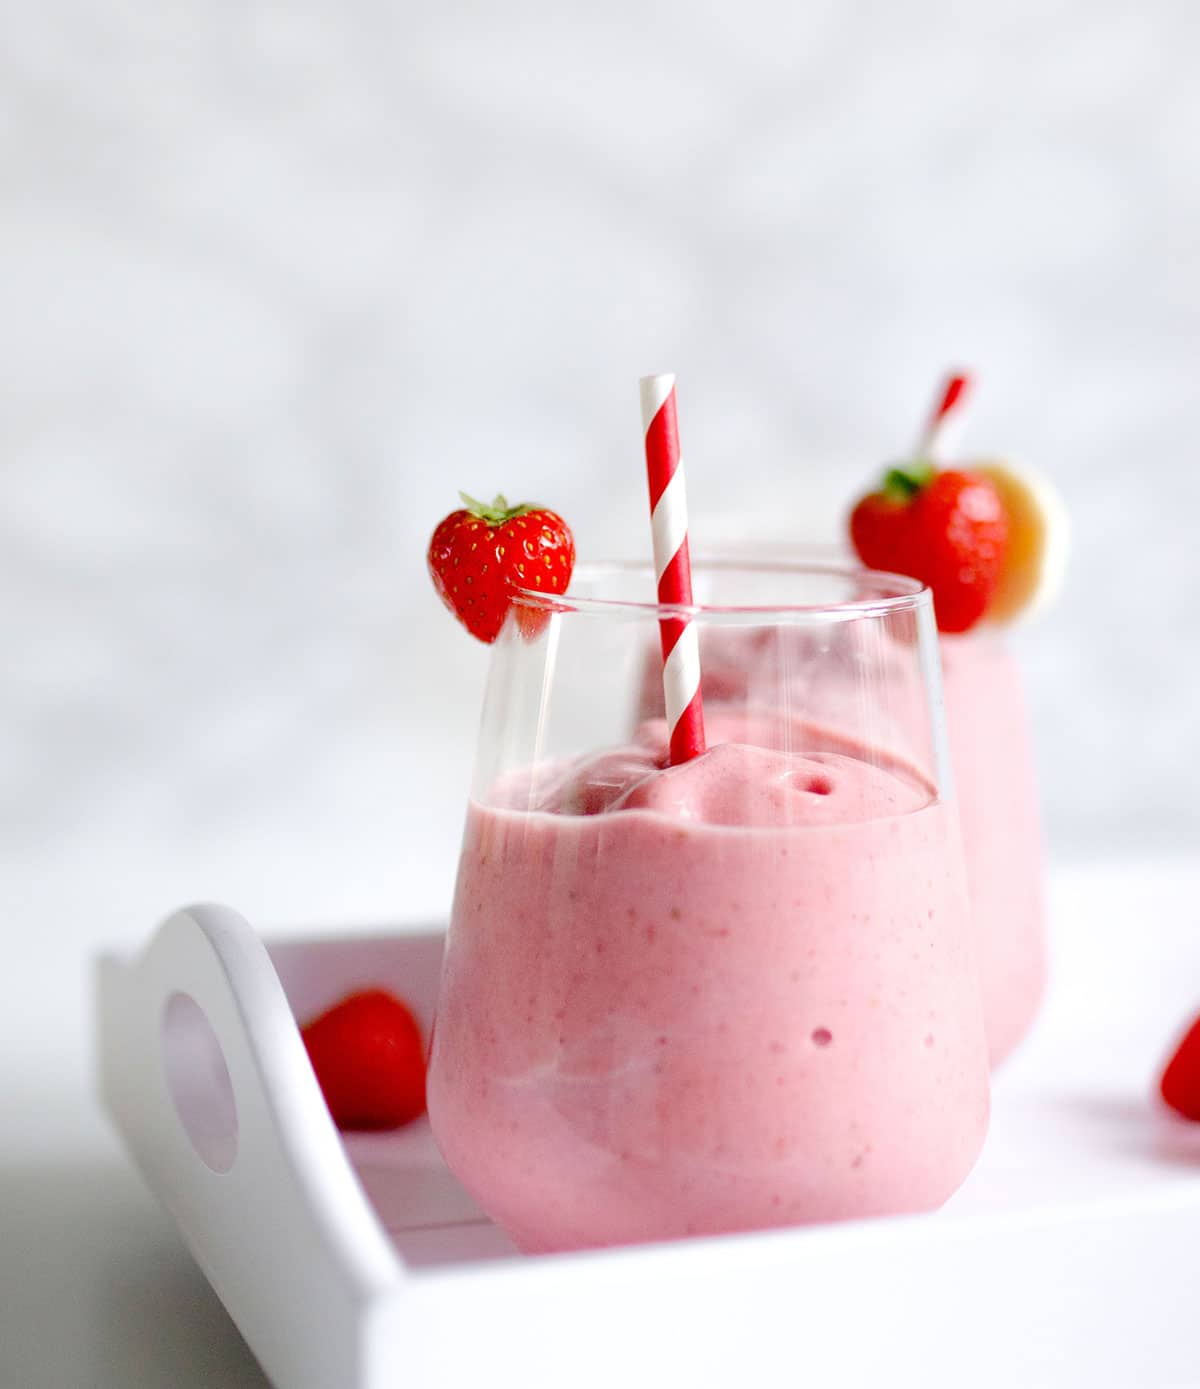 Strawberry banana smoothie with a straw in a glass.